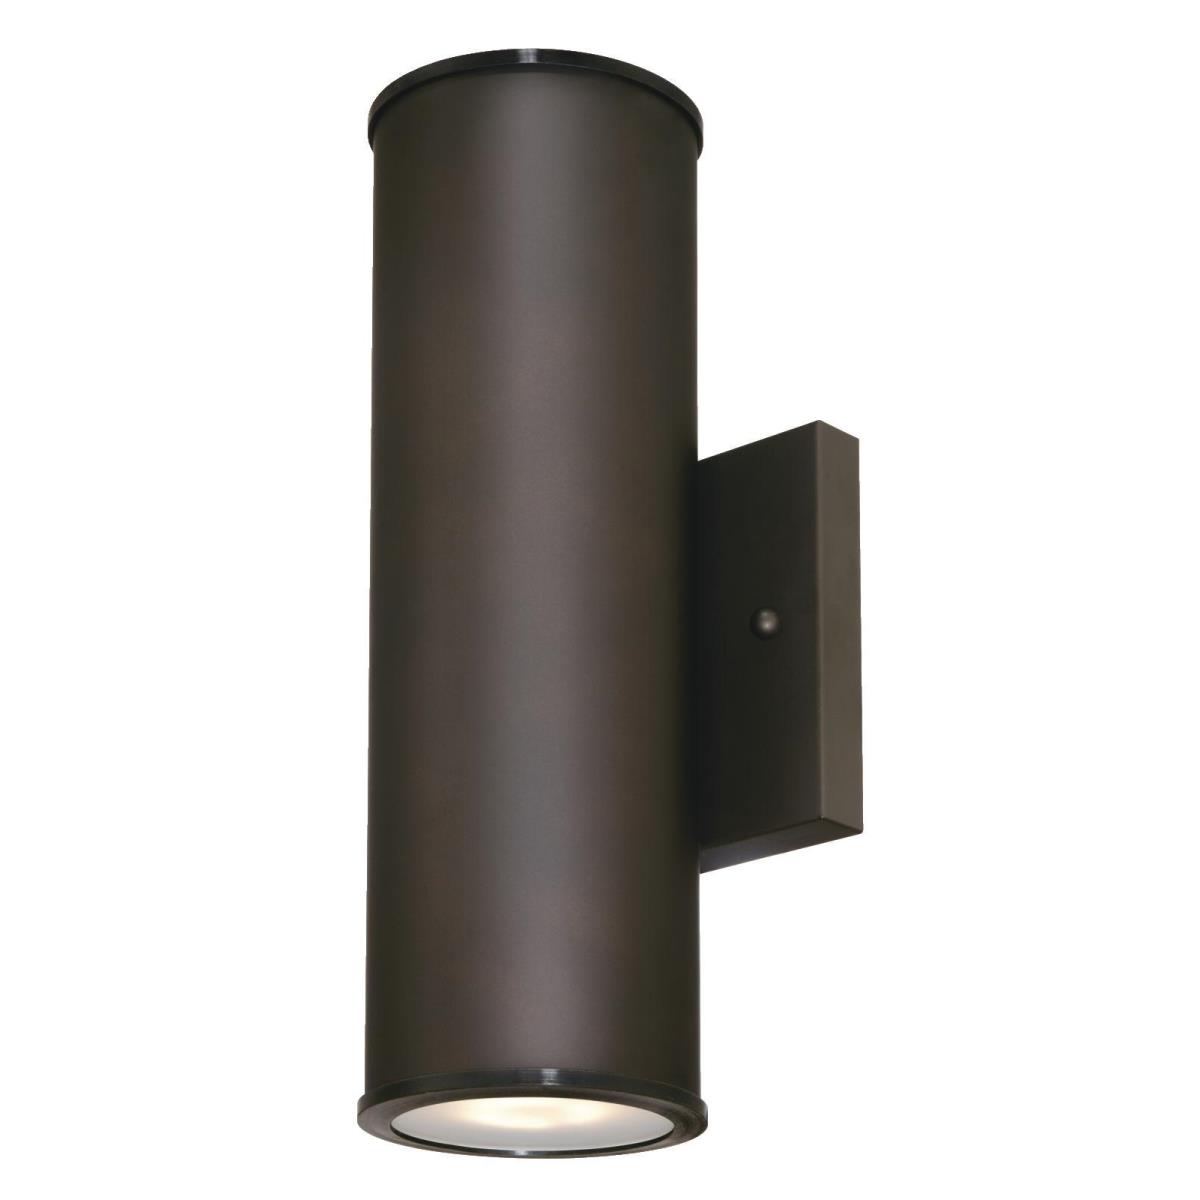 2 Light LED Up and Down Light Wall Fixture Oil Rubbed Bronze Finish with Frosted Glass Lens